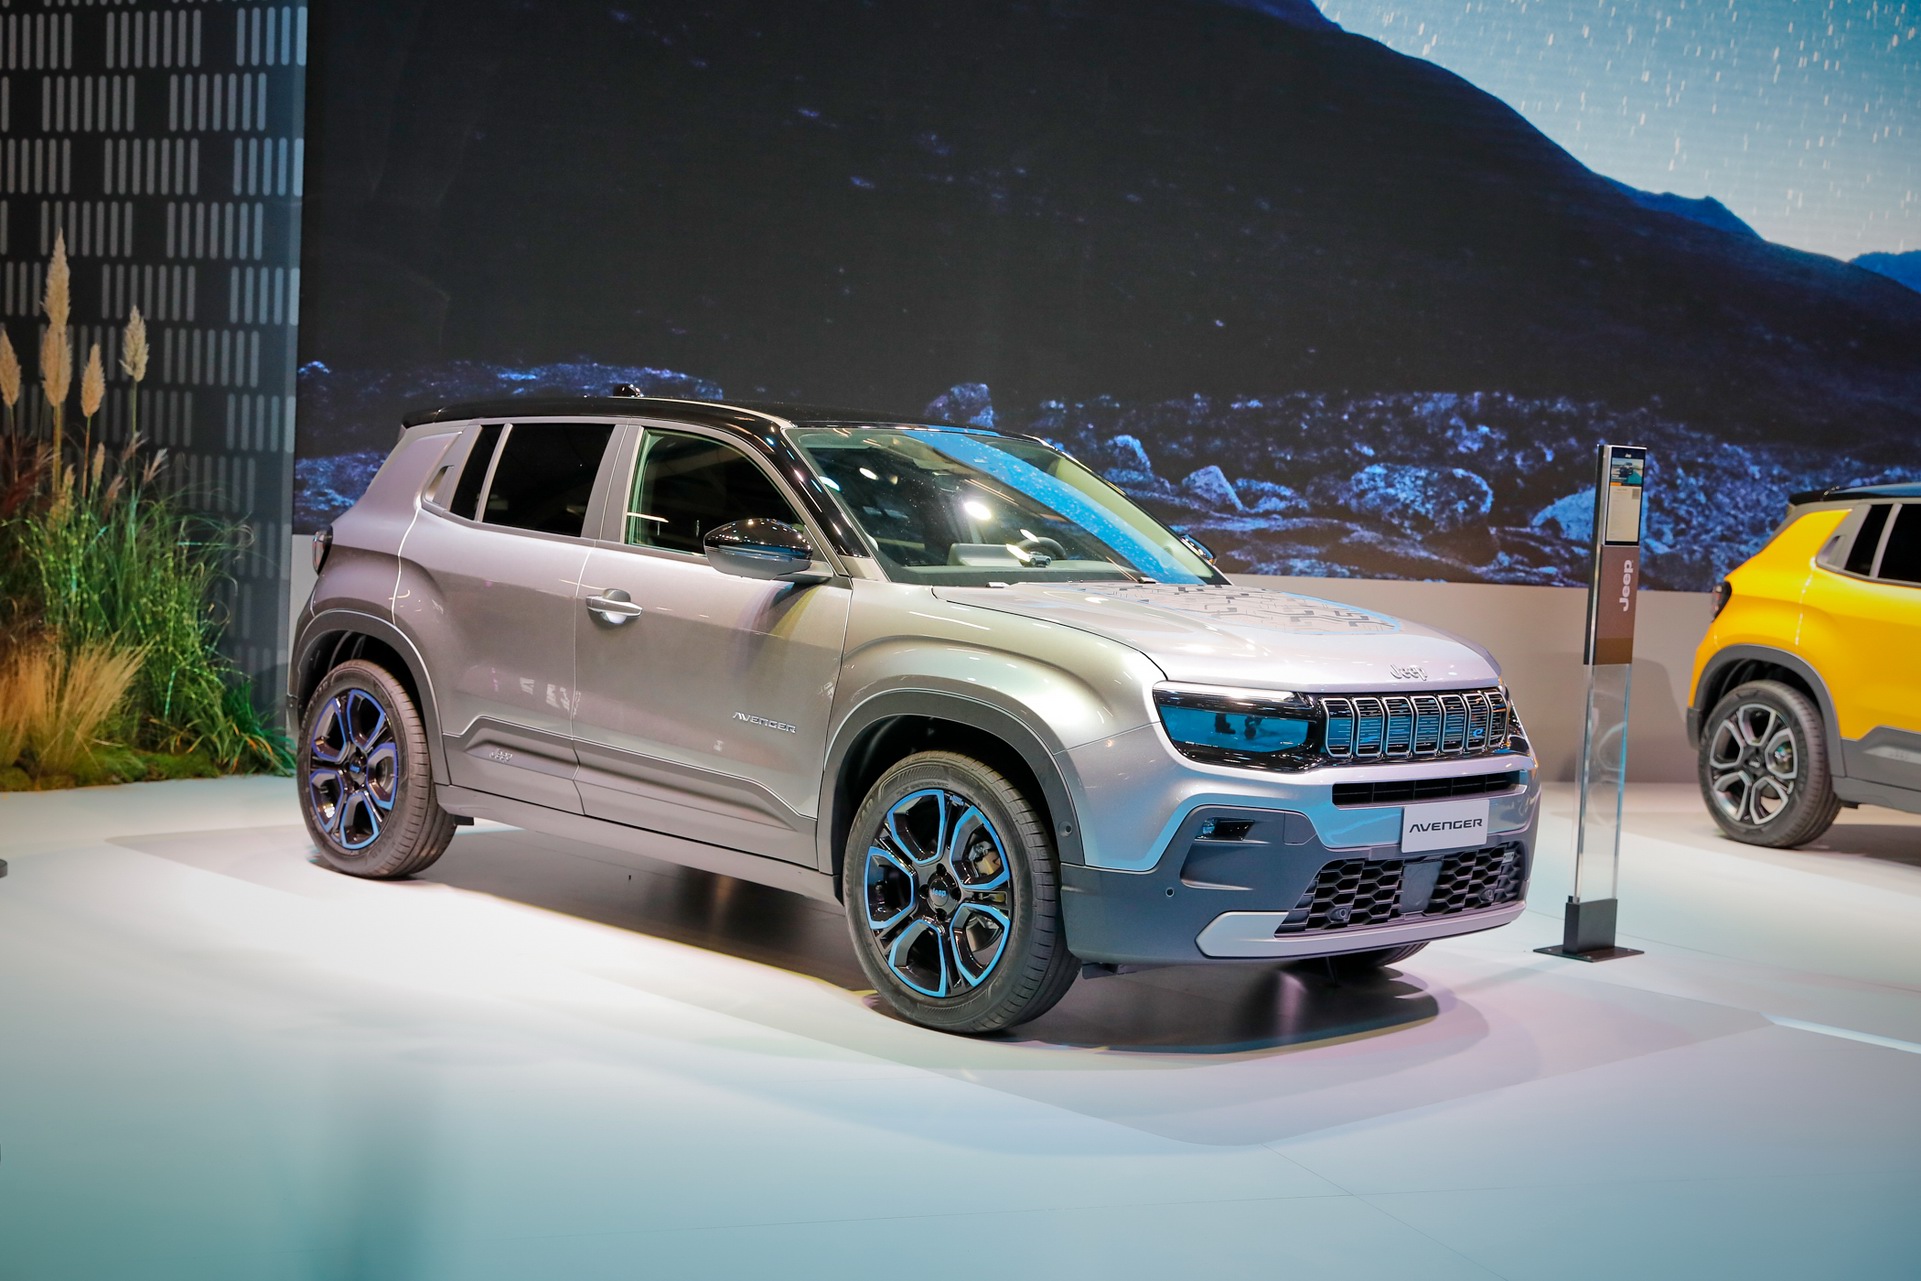 2023 Jeep Avenger Detailed As A FWD Electric SUV For Europe, ICE